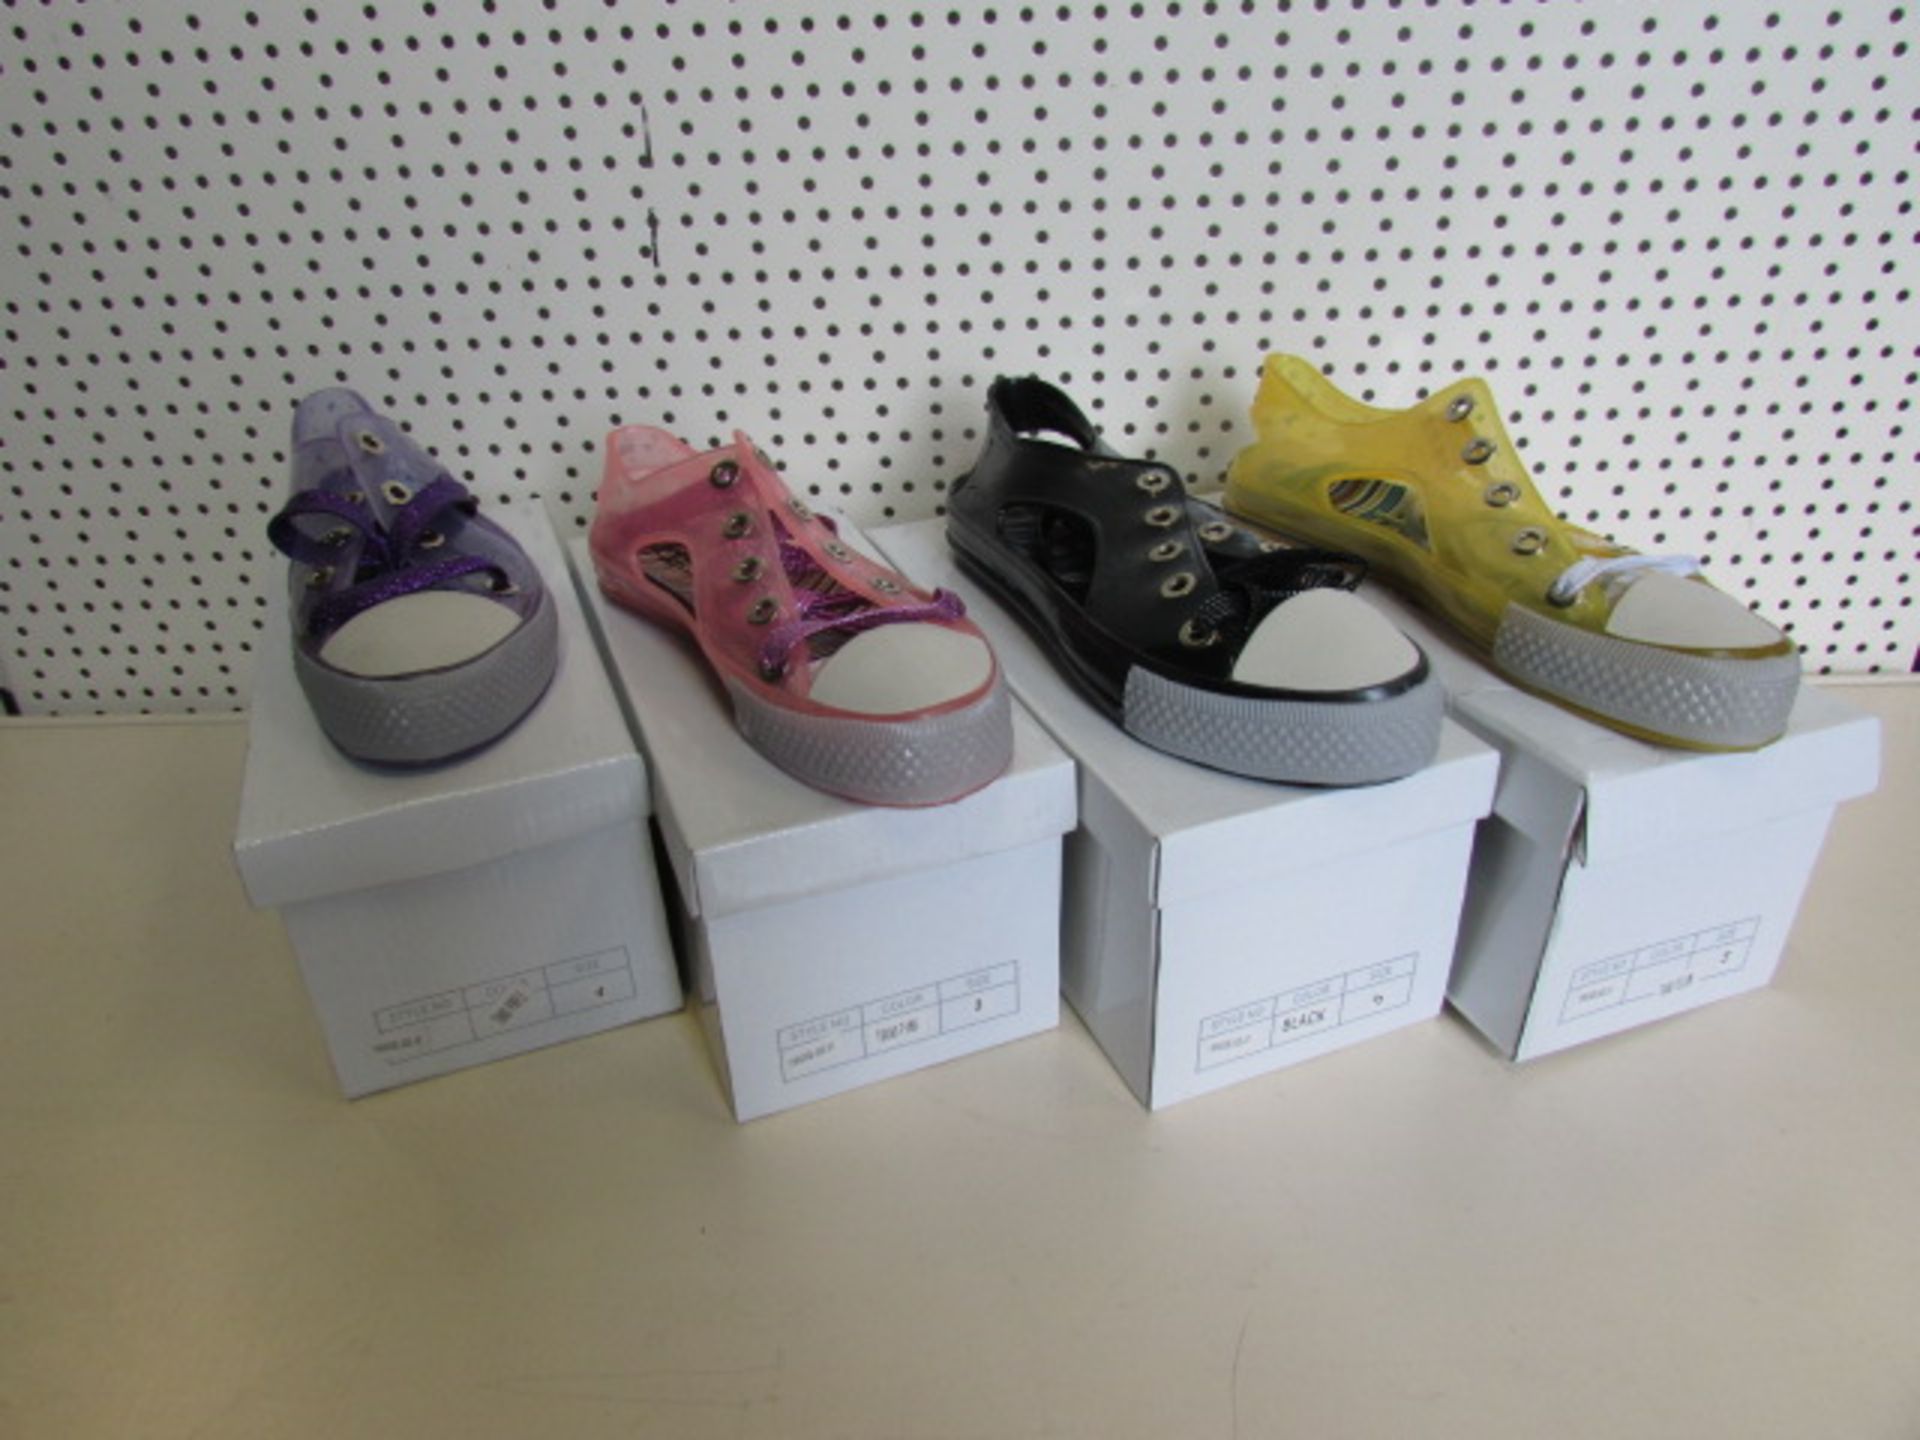 25 x Cyclone Paradise Lace Up Shoes In Various Sizes & Colours